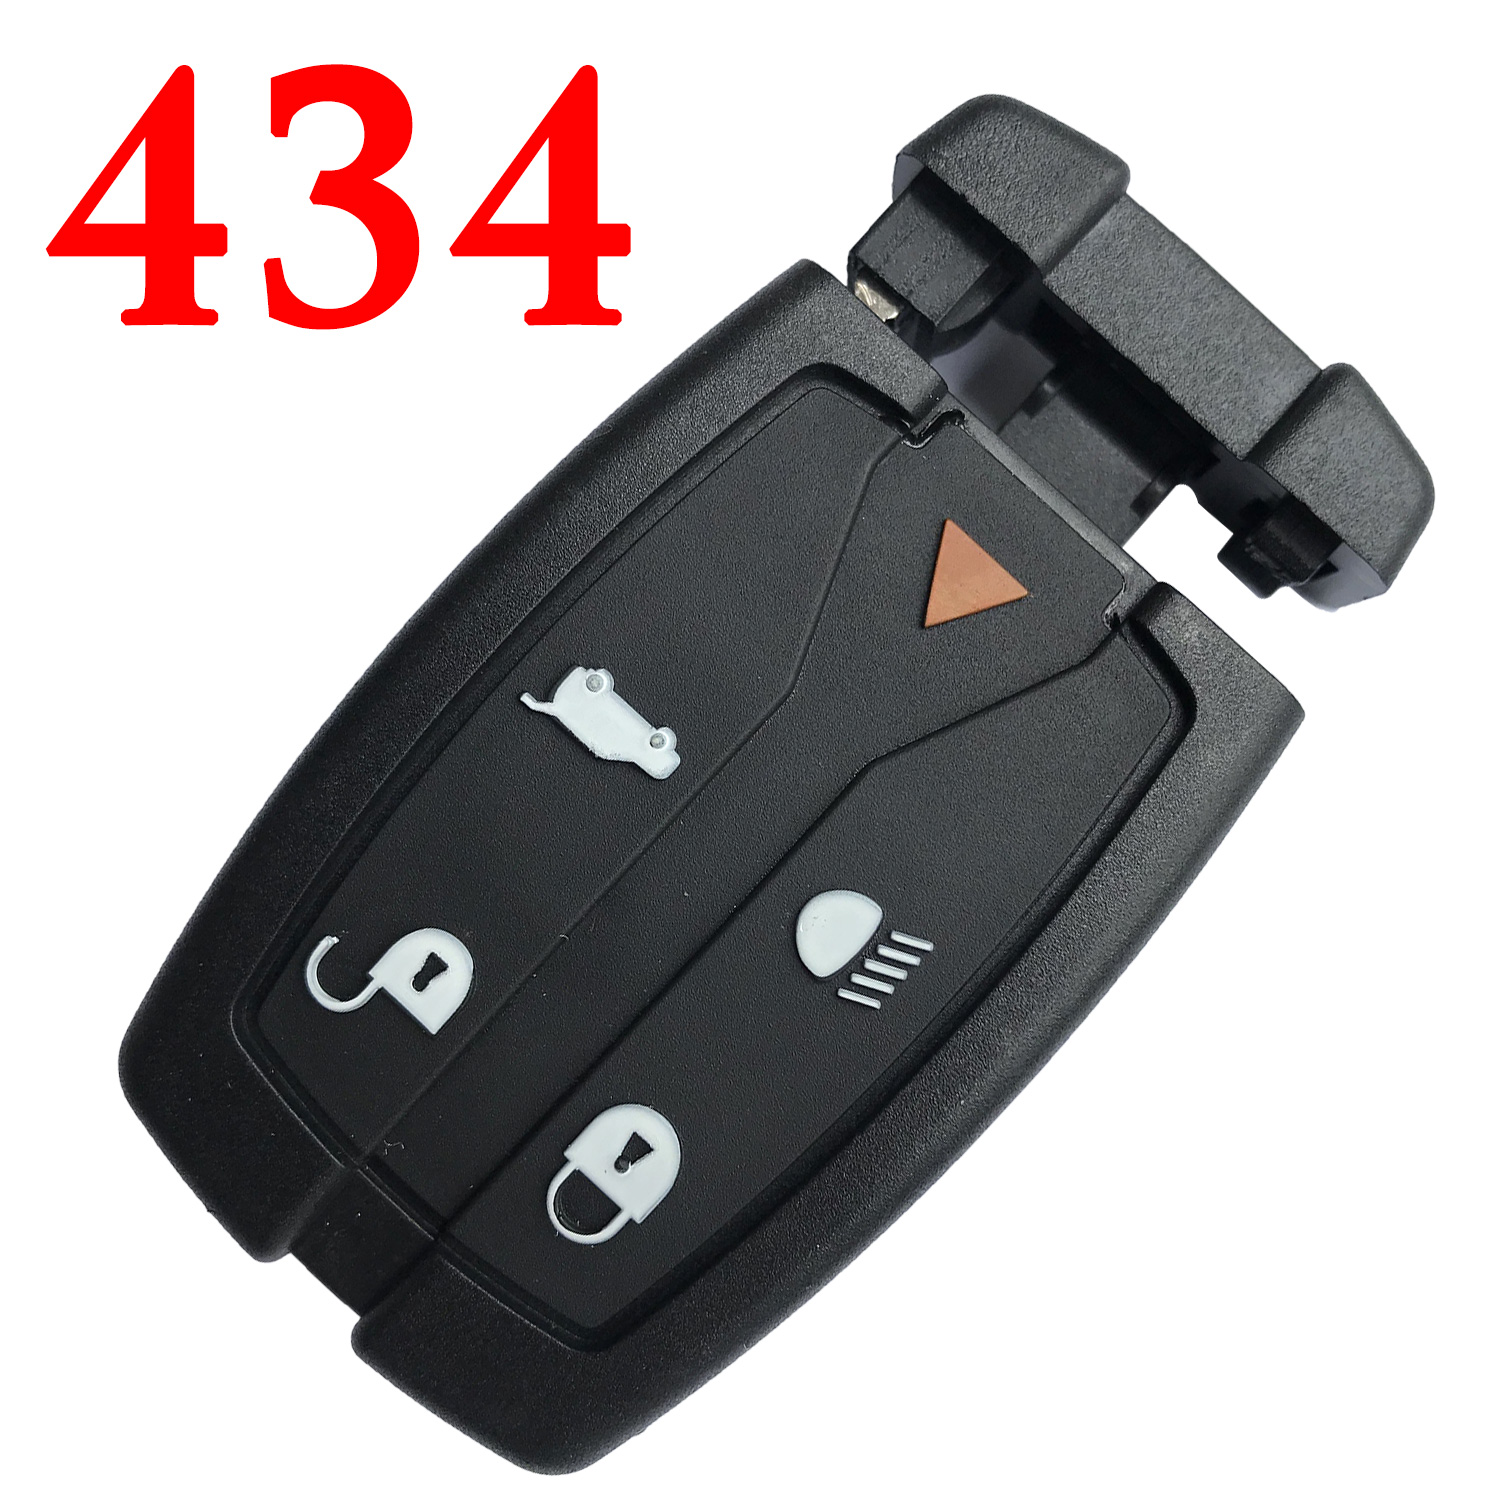 5 Buttons 433 MHz Smart Proximity Key for Land Rover FreeLander